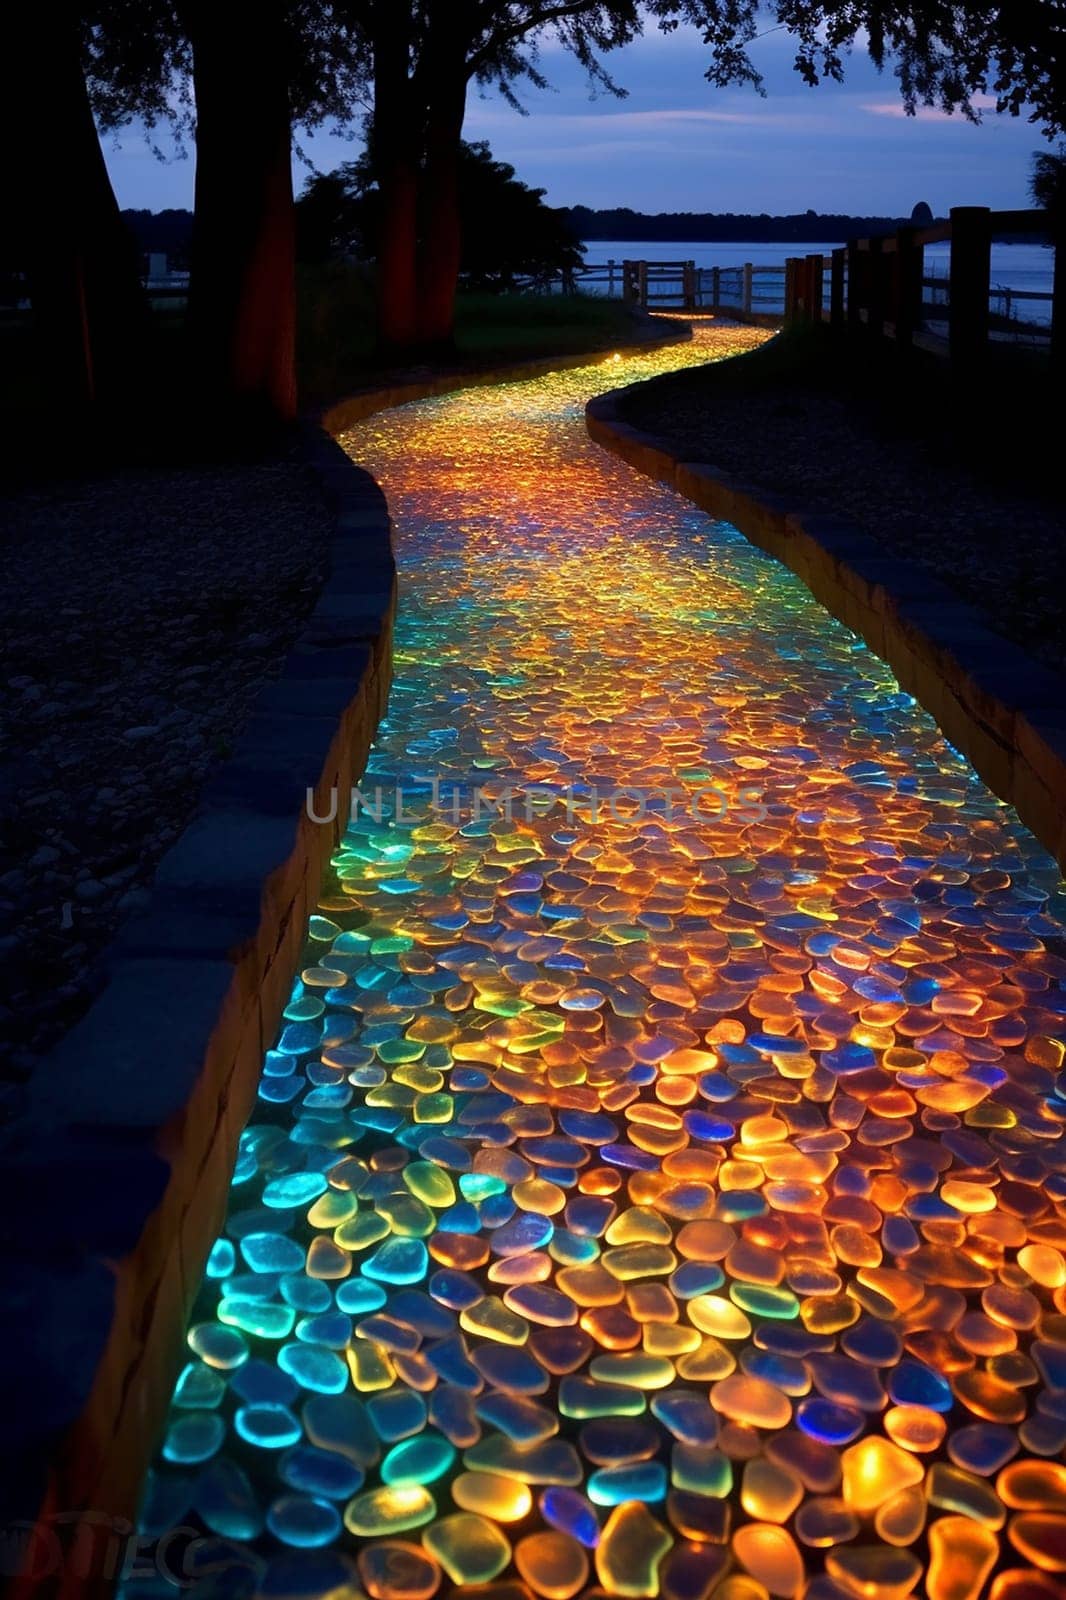 Colorful lights illuminate a winding path at night creating a magical atmosphere. by Hype2art